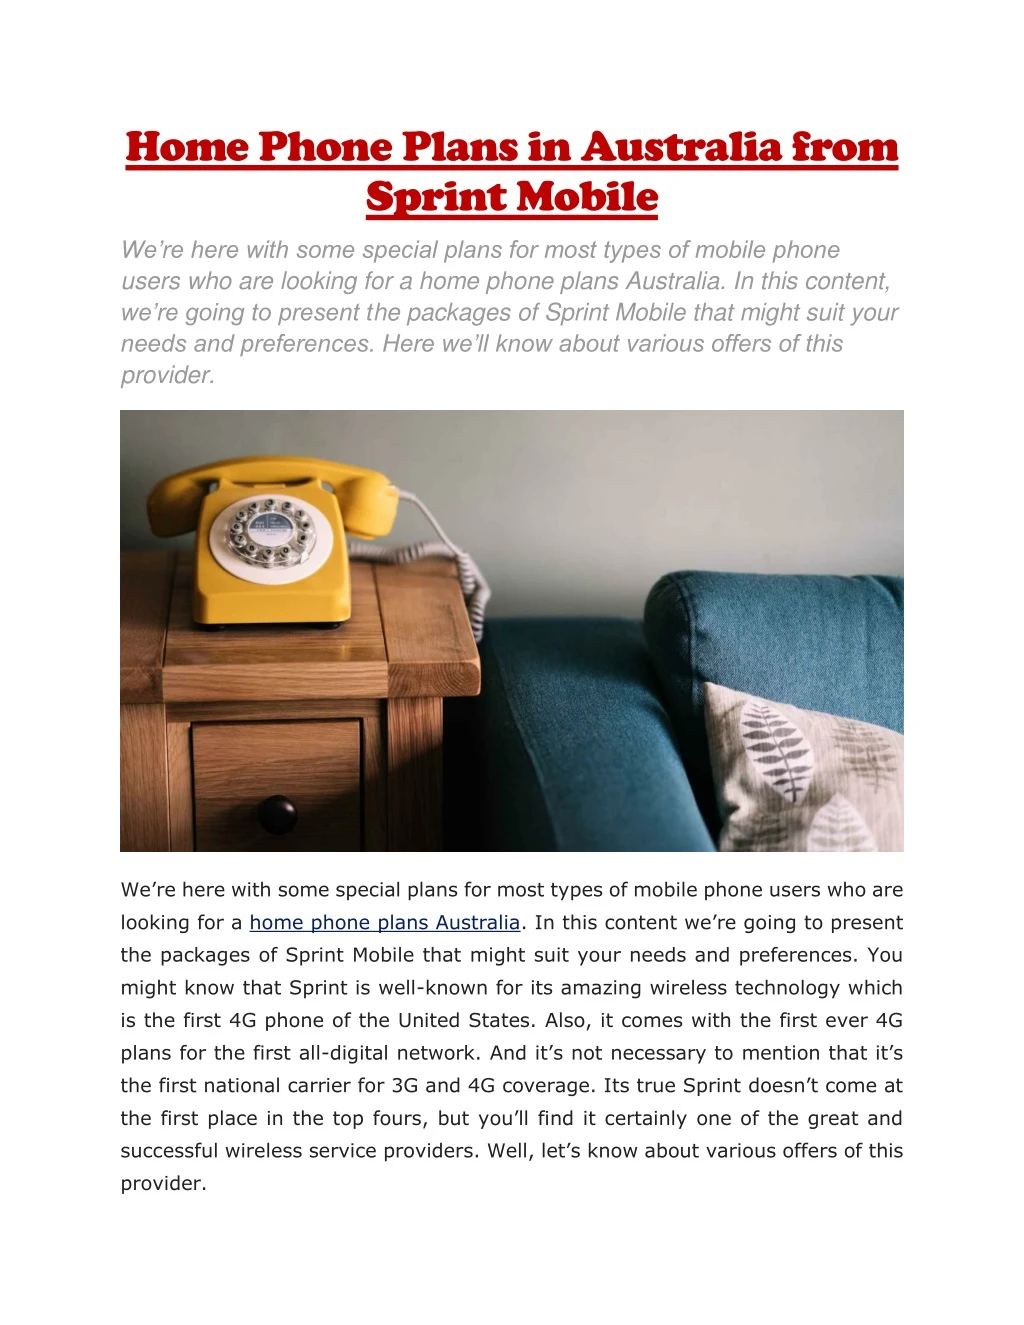 home phone plans in australia from sprint mobile